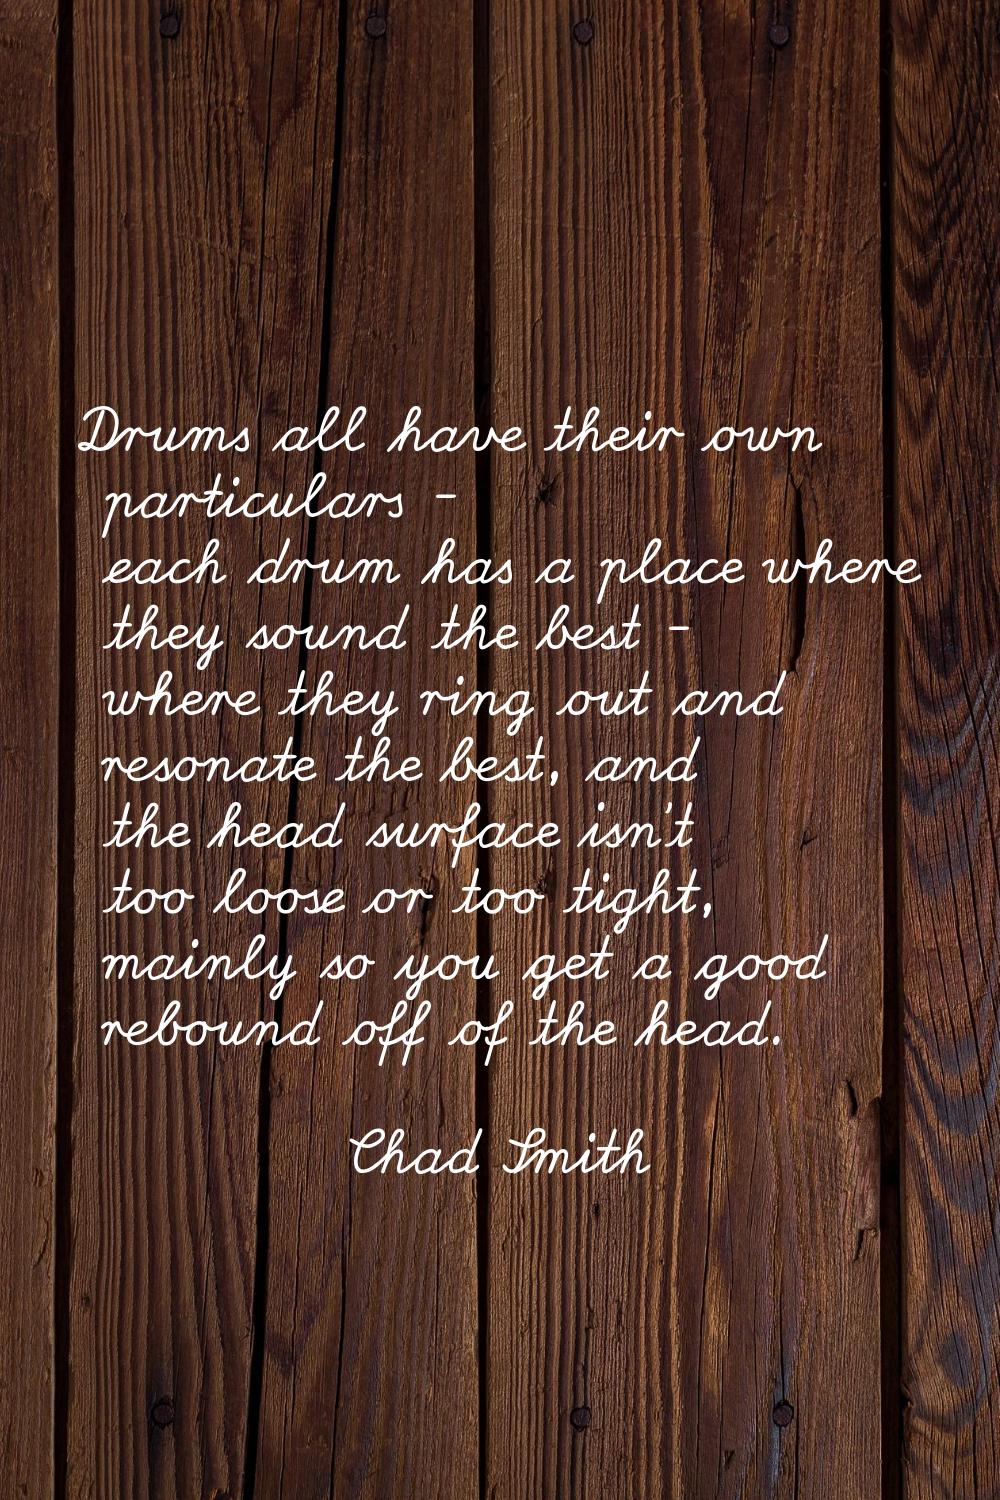 Drums all have their own particulars - each drum has a place where they sound the best - where they